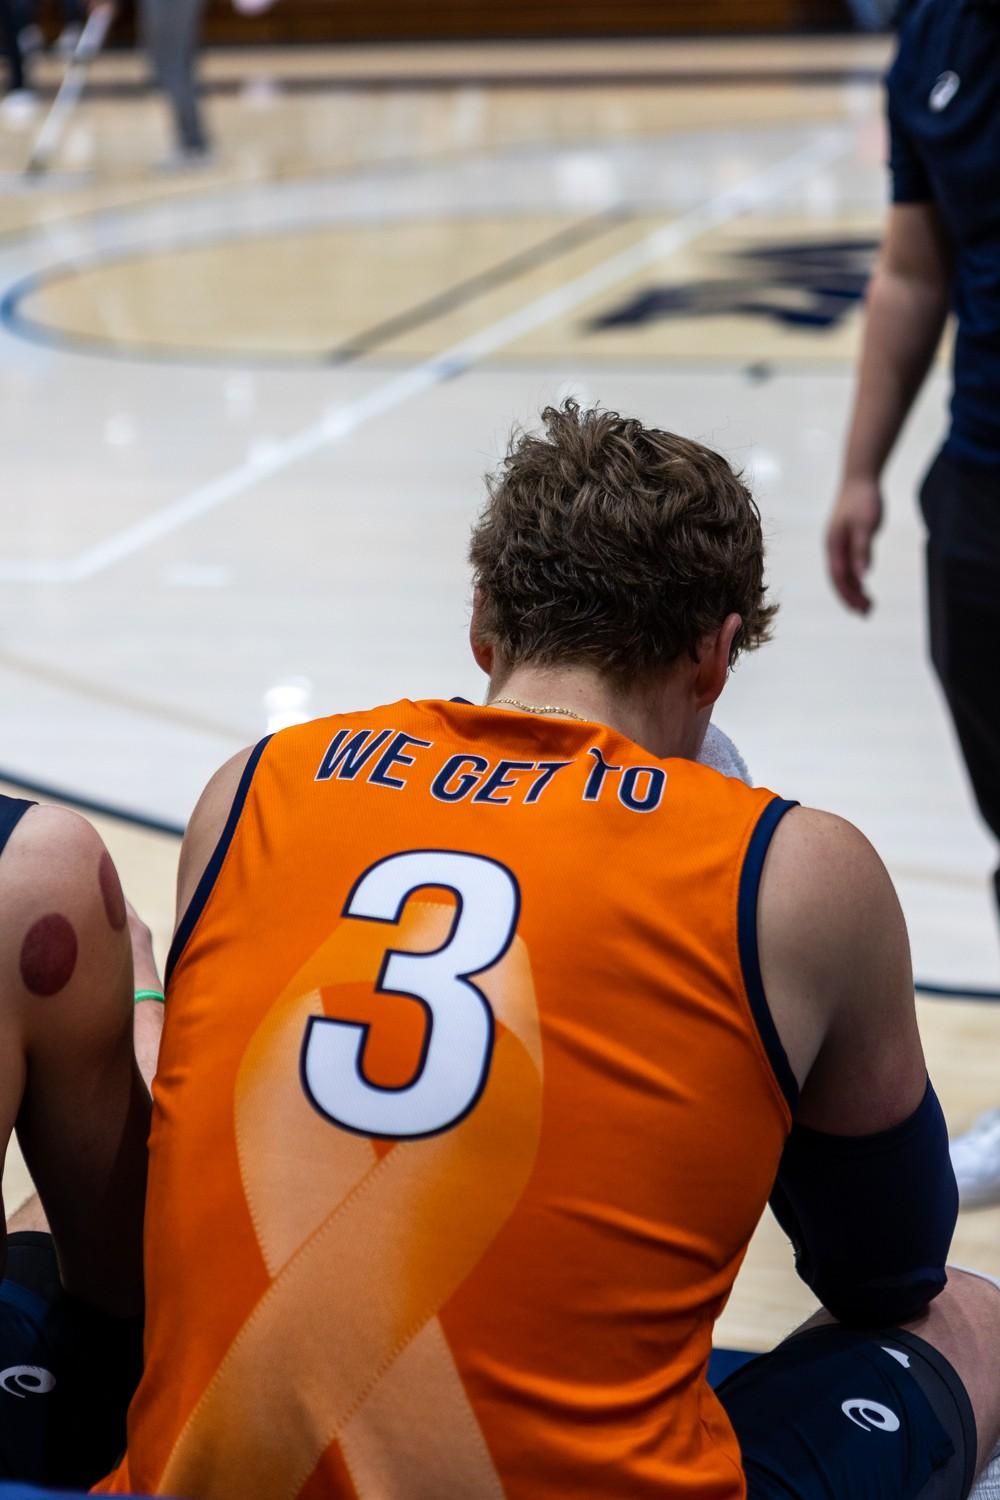 Cole sits on the bench during a break in gameplay at Firestone Fieldhouse on March 9. Cole approaches volleyball with a sense of gratuity, evident by the writing on the back of his jersey: "WE GET TO." Photo by Brandon Rubsamen